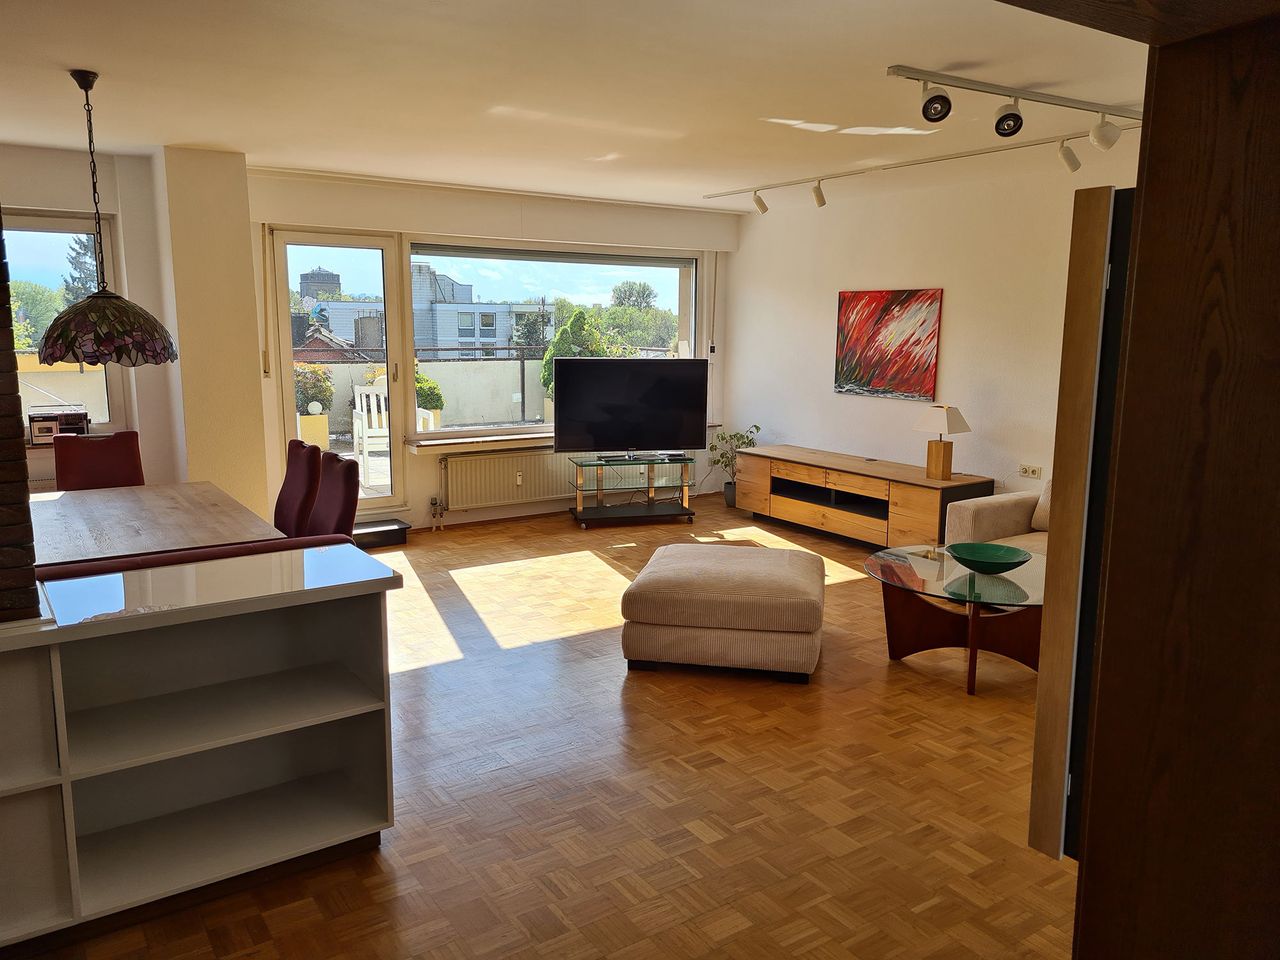 Beautiful penthouse flat furnished - south of Bochum, 40m² roof terrace, 500m to the university, W-Lan